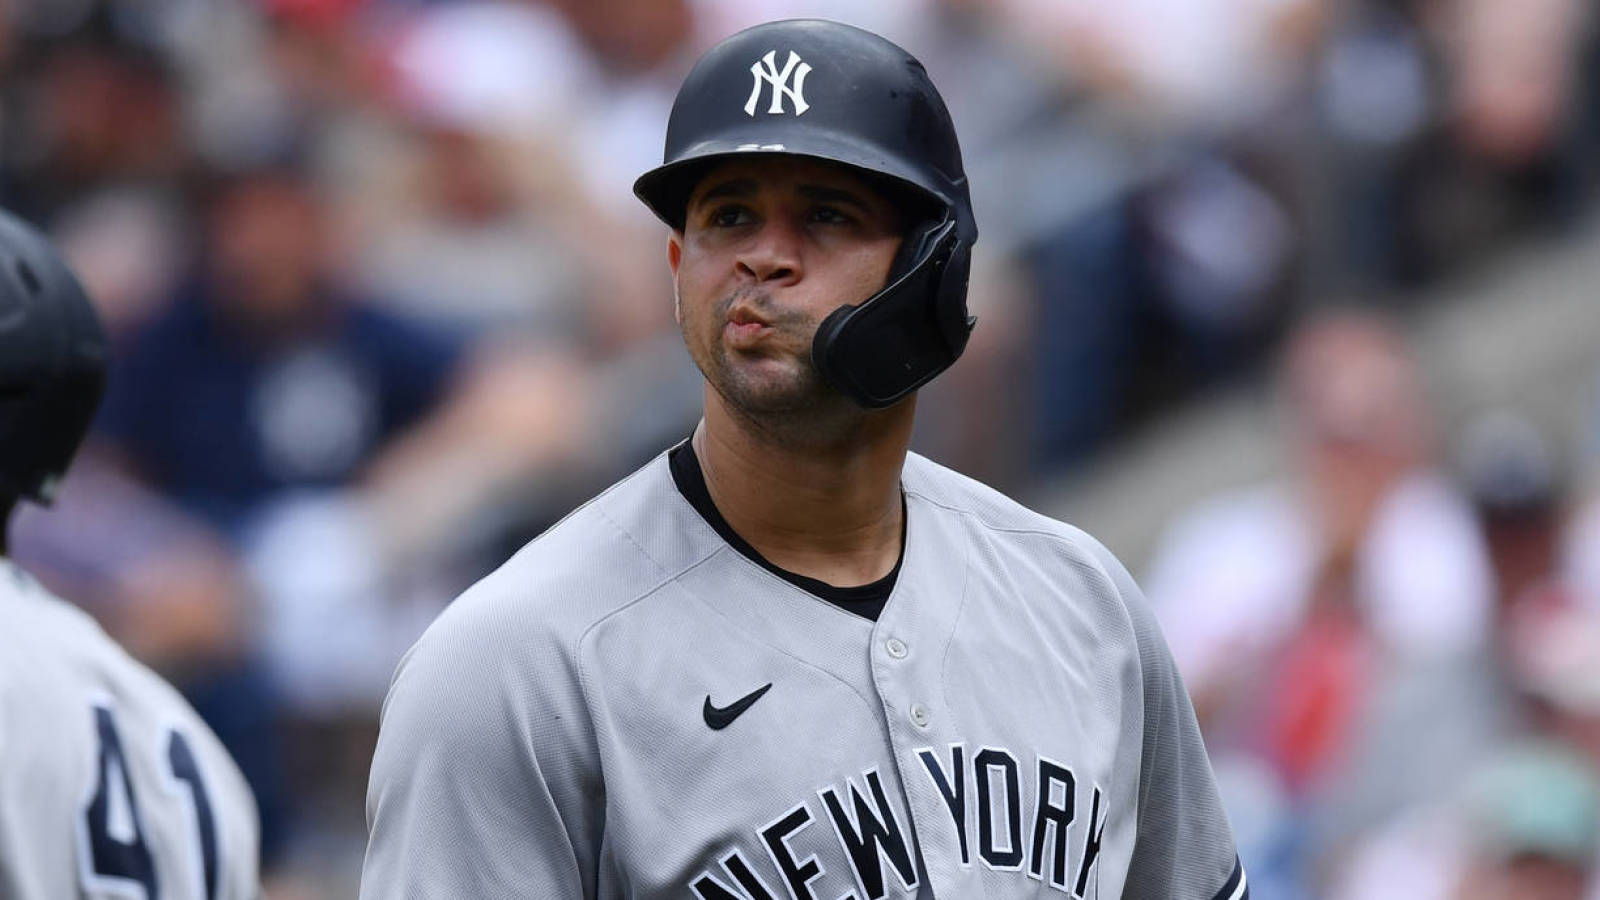 Yankees catcher Gary Sanchez tests positive for COVID-19